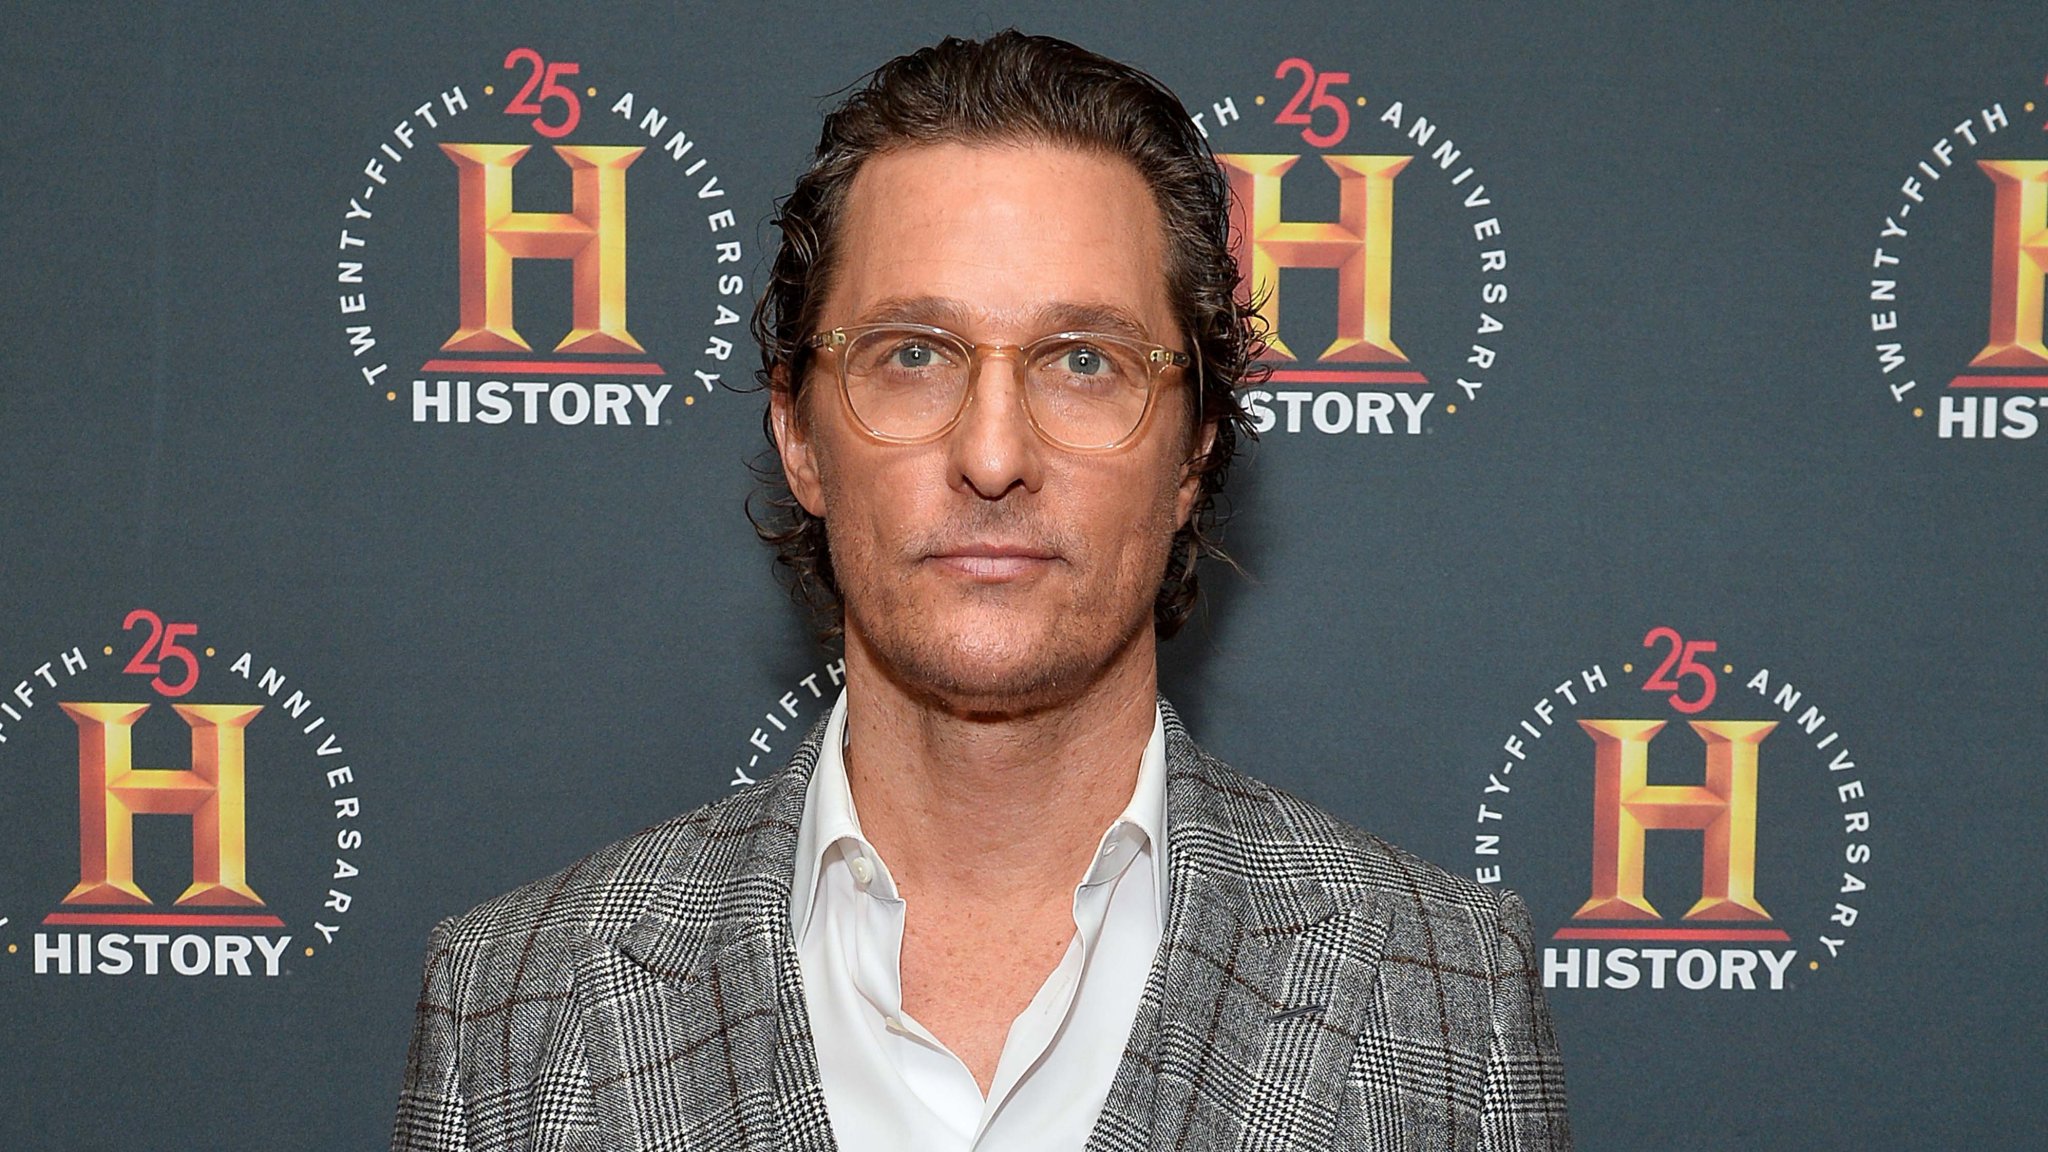 Matthew McConaughey speaks out on 'illiberals,' 'extreme' right and cancel culture causing divides in the US